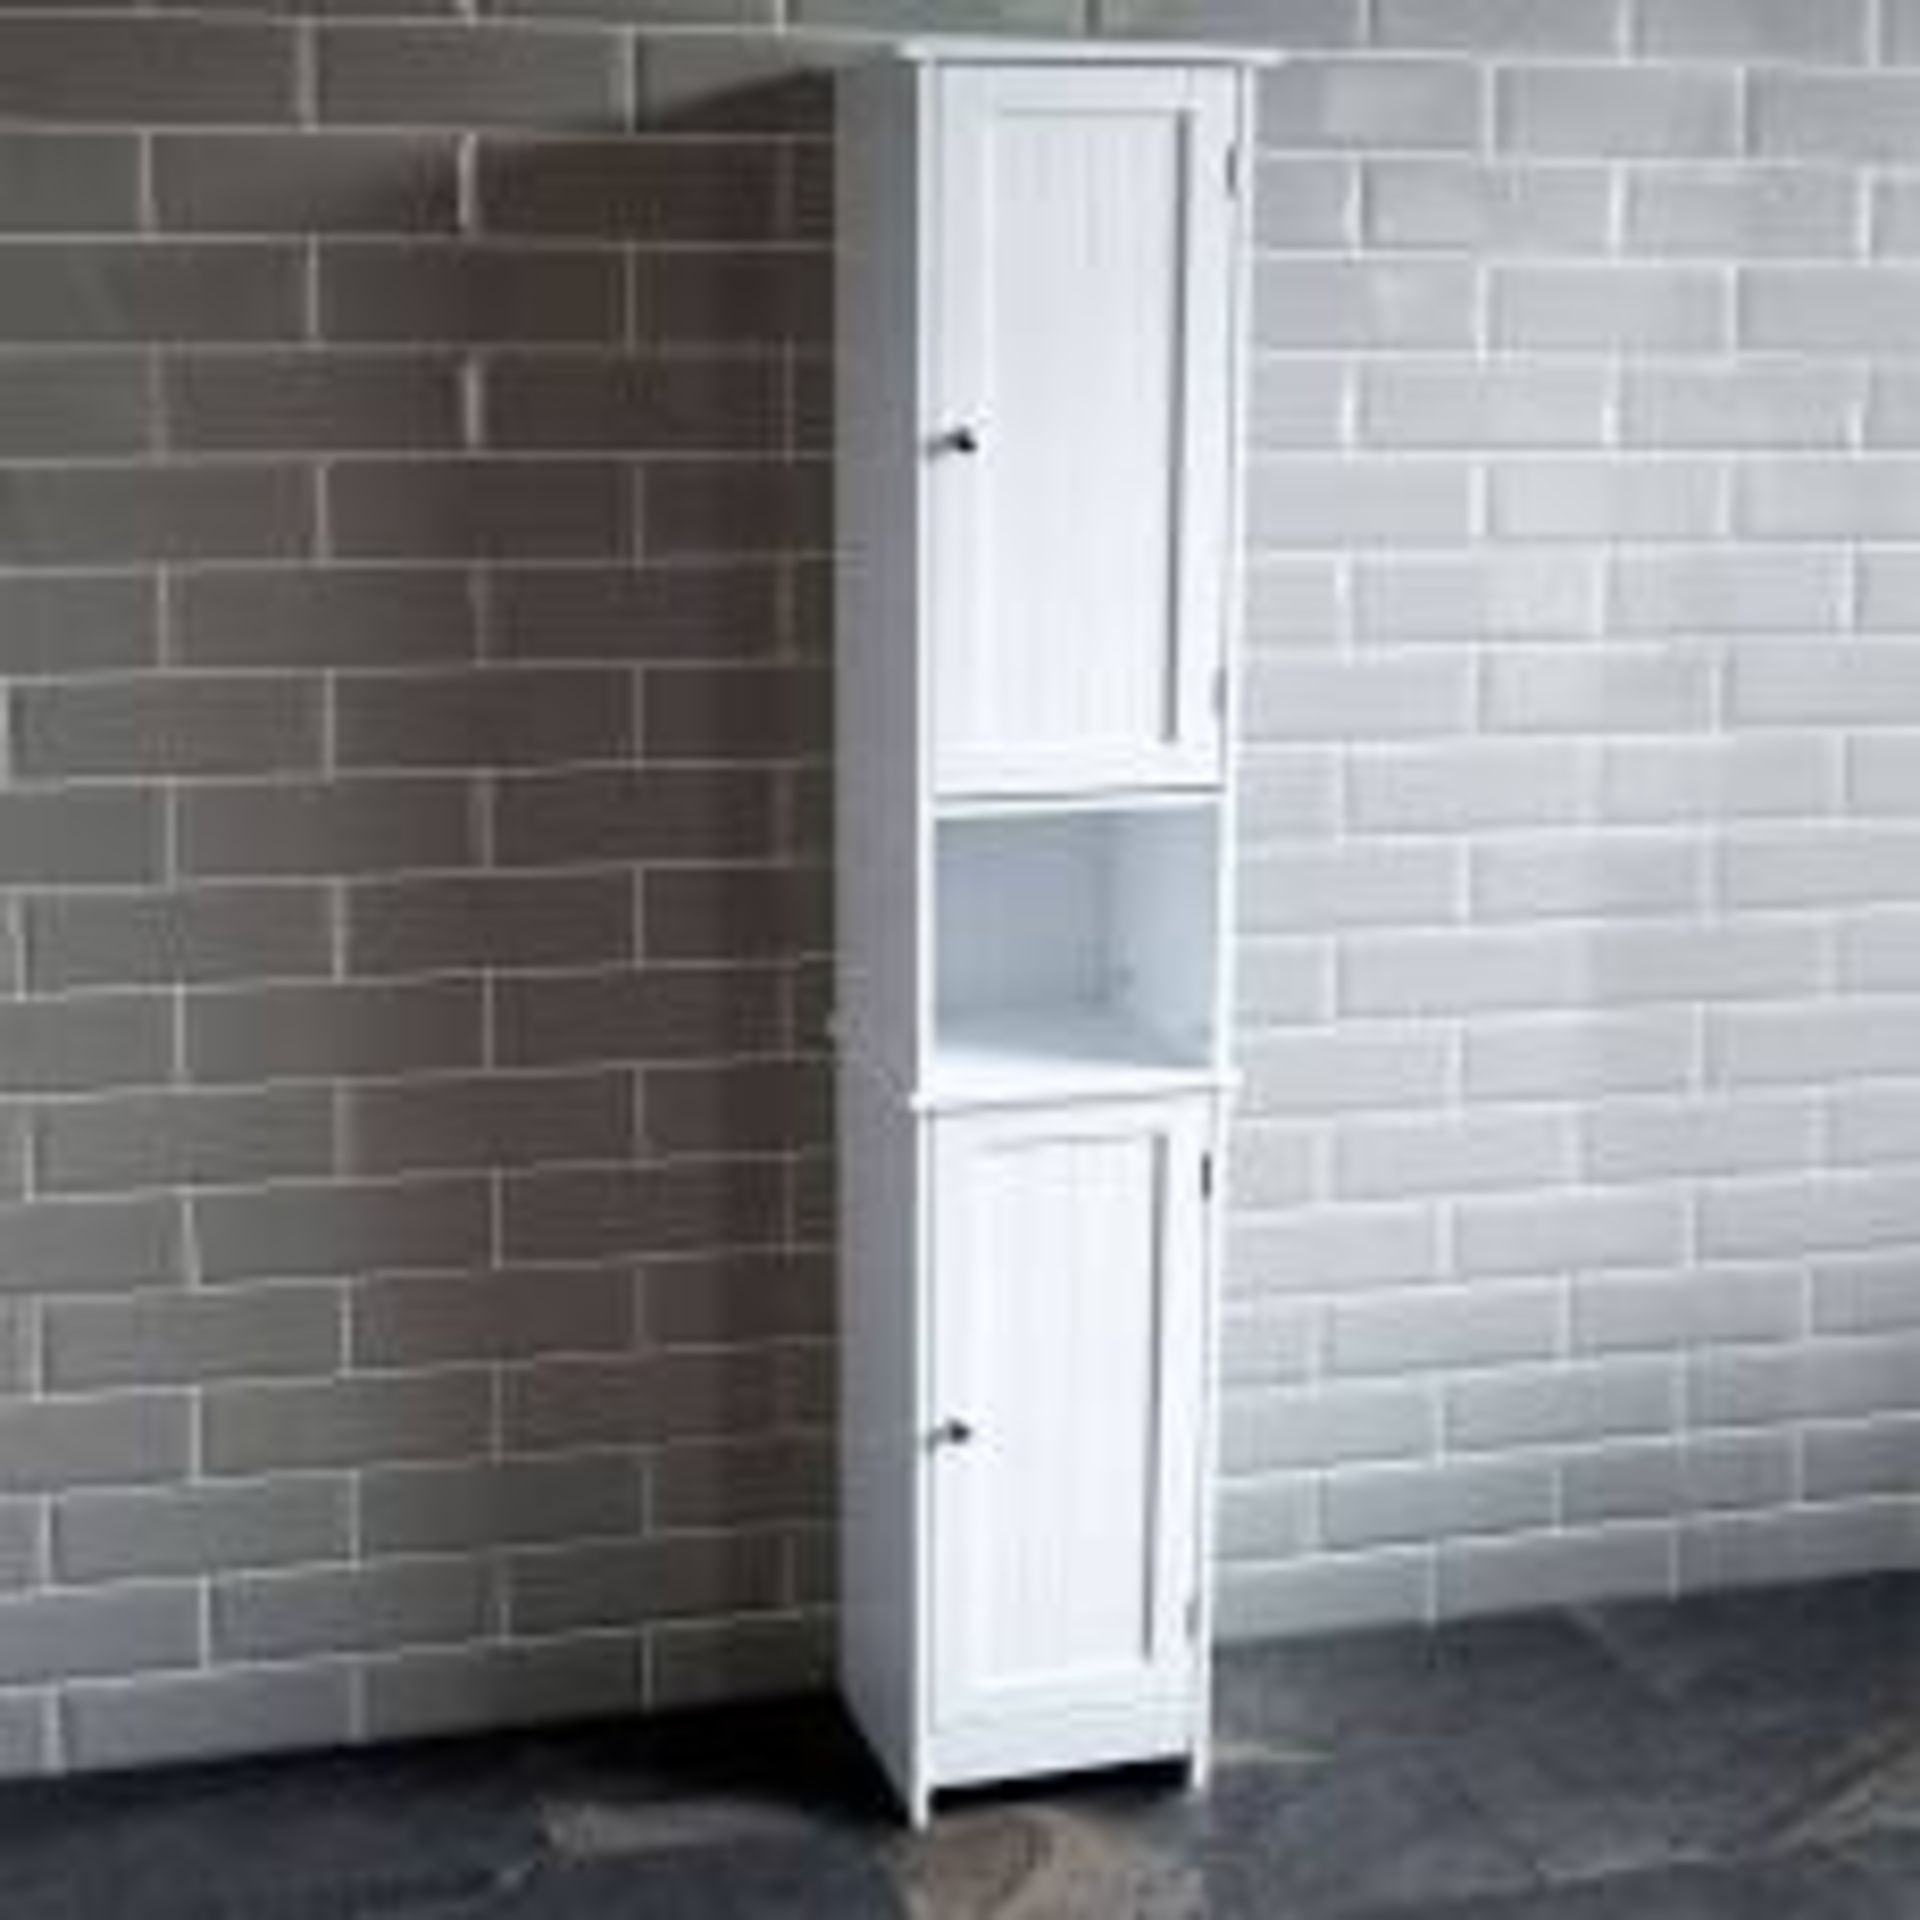 Boxed Bath Veda Priano Tall Bathroom Cabinet RRP £85 (18892) (Appraisals Available Upon Request)